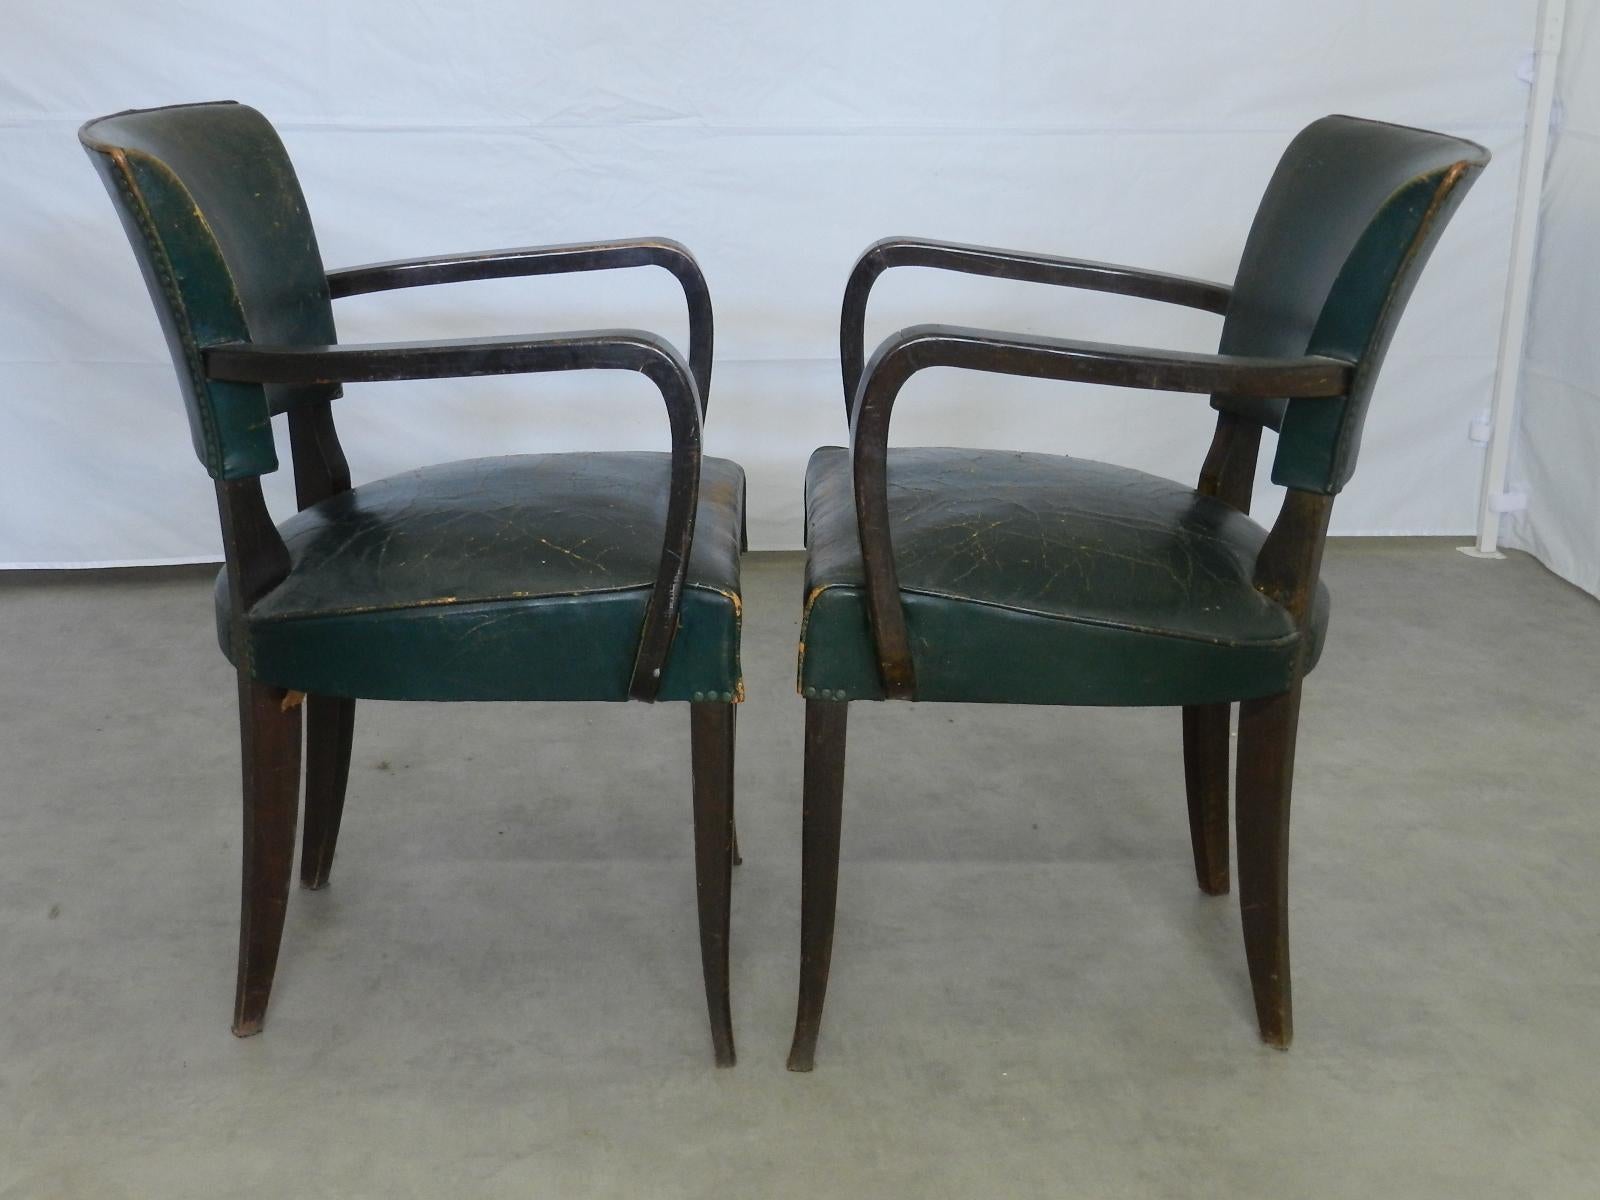 Pair of French Art Deco bridge chairs, circa 1930
Two open armchairs
Use or recover
Original vintage condition the Leather is worn, no holes and will be treated and waxed before shipping
Frames are sound and solid
Alternatively the leather is easily